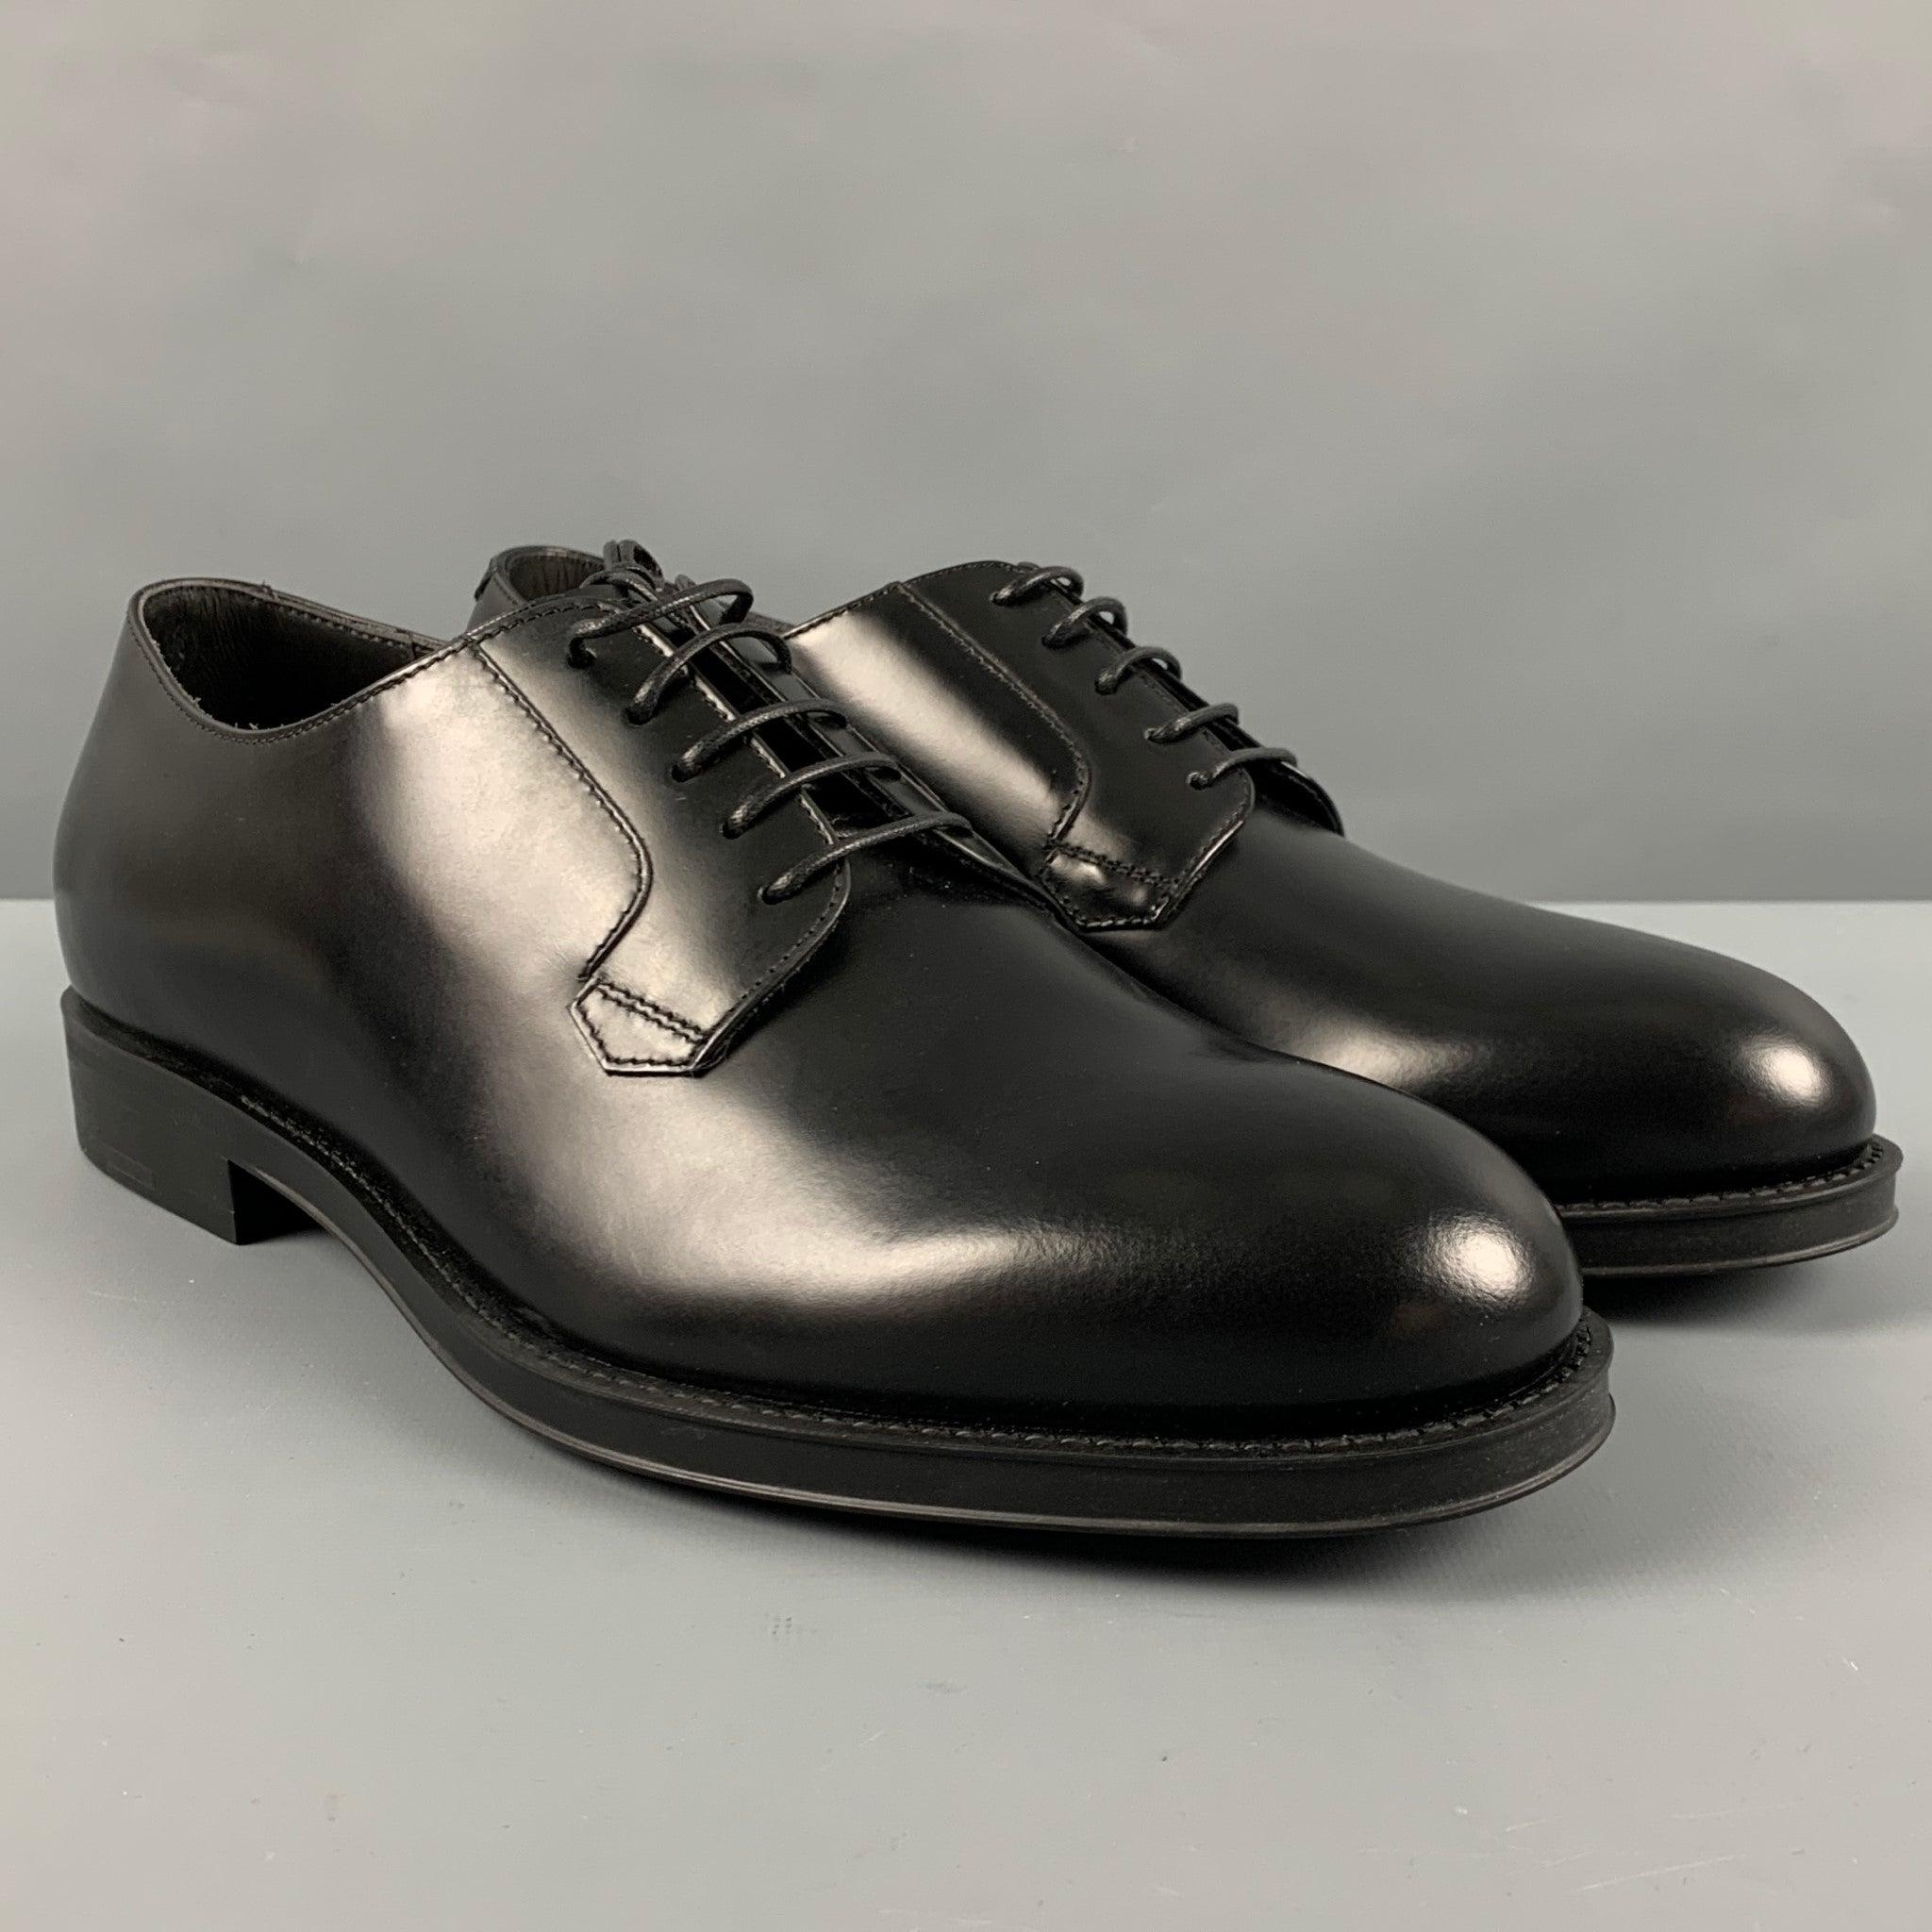 GIORGIO ARMANI shoes
in a black leather fabric featuring lace-up closure. Comes with box and dust bag. Made in Italy.New with Box. 

Marked:   X2C594 7Outsole: 11.5 inches  x 4.25 inches 
  
  
 
Reference: 127517
Category: Lace Up Shoes
More